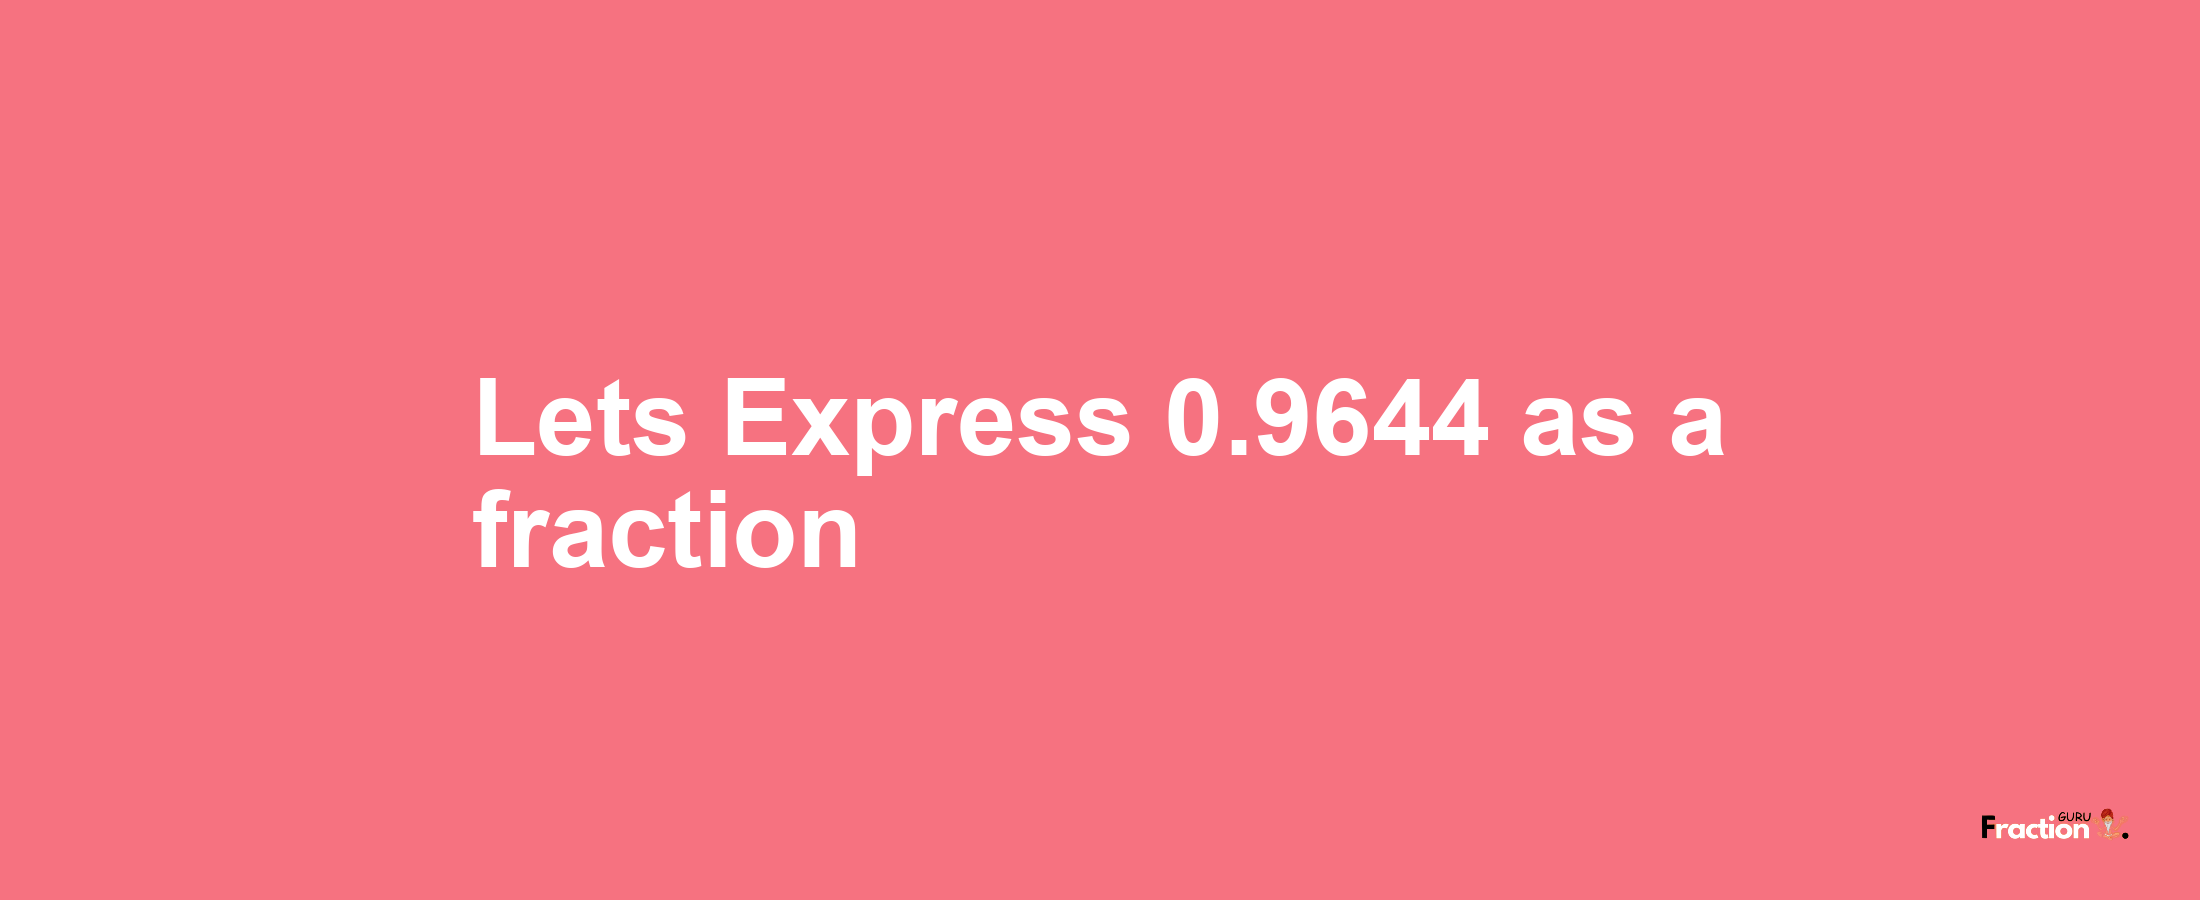 Lets Express 0.9644 as afraction